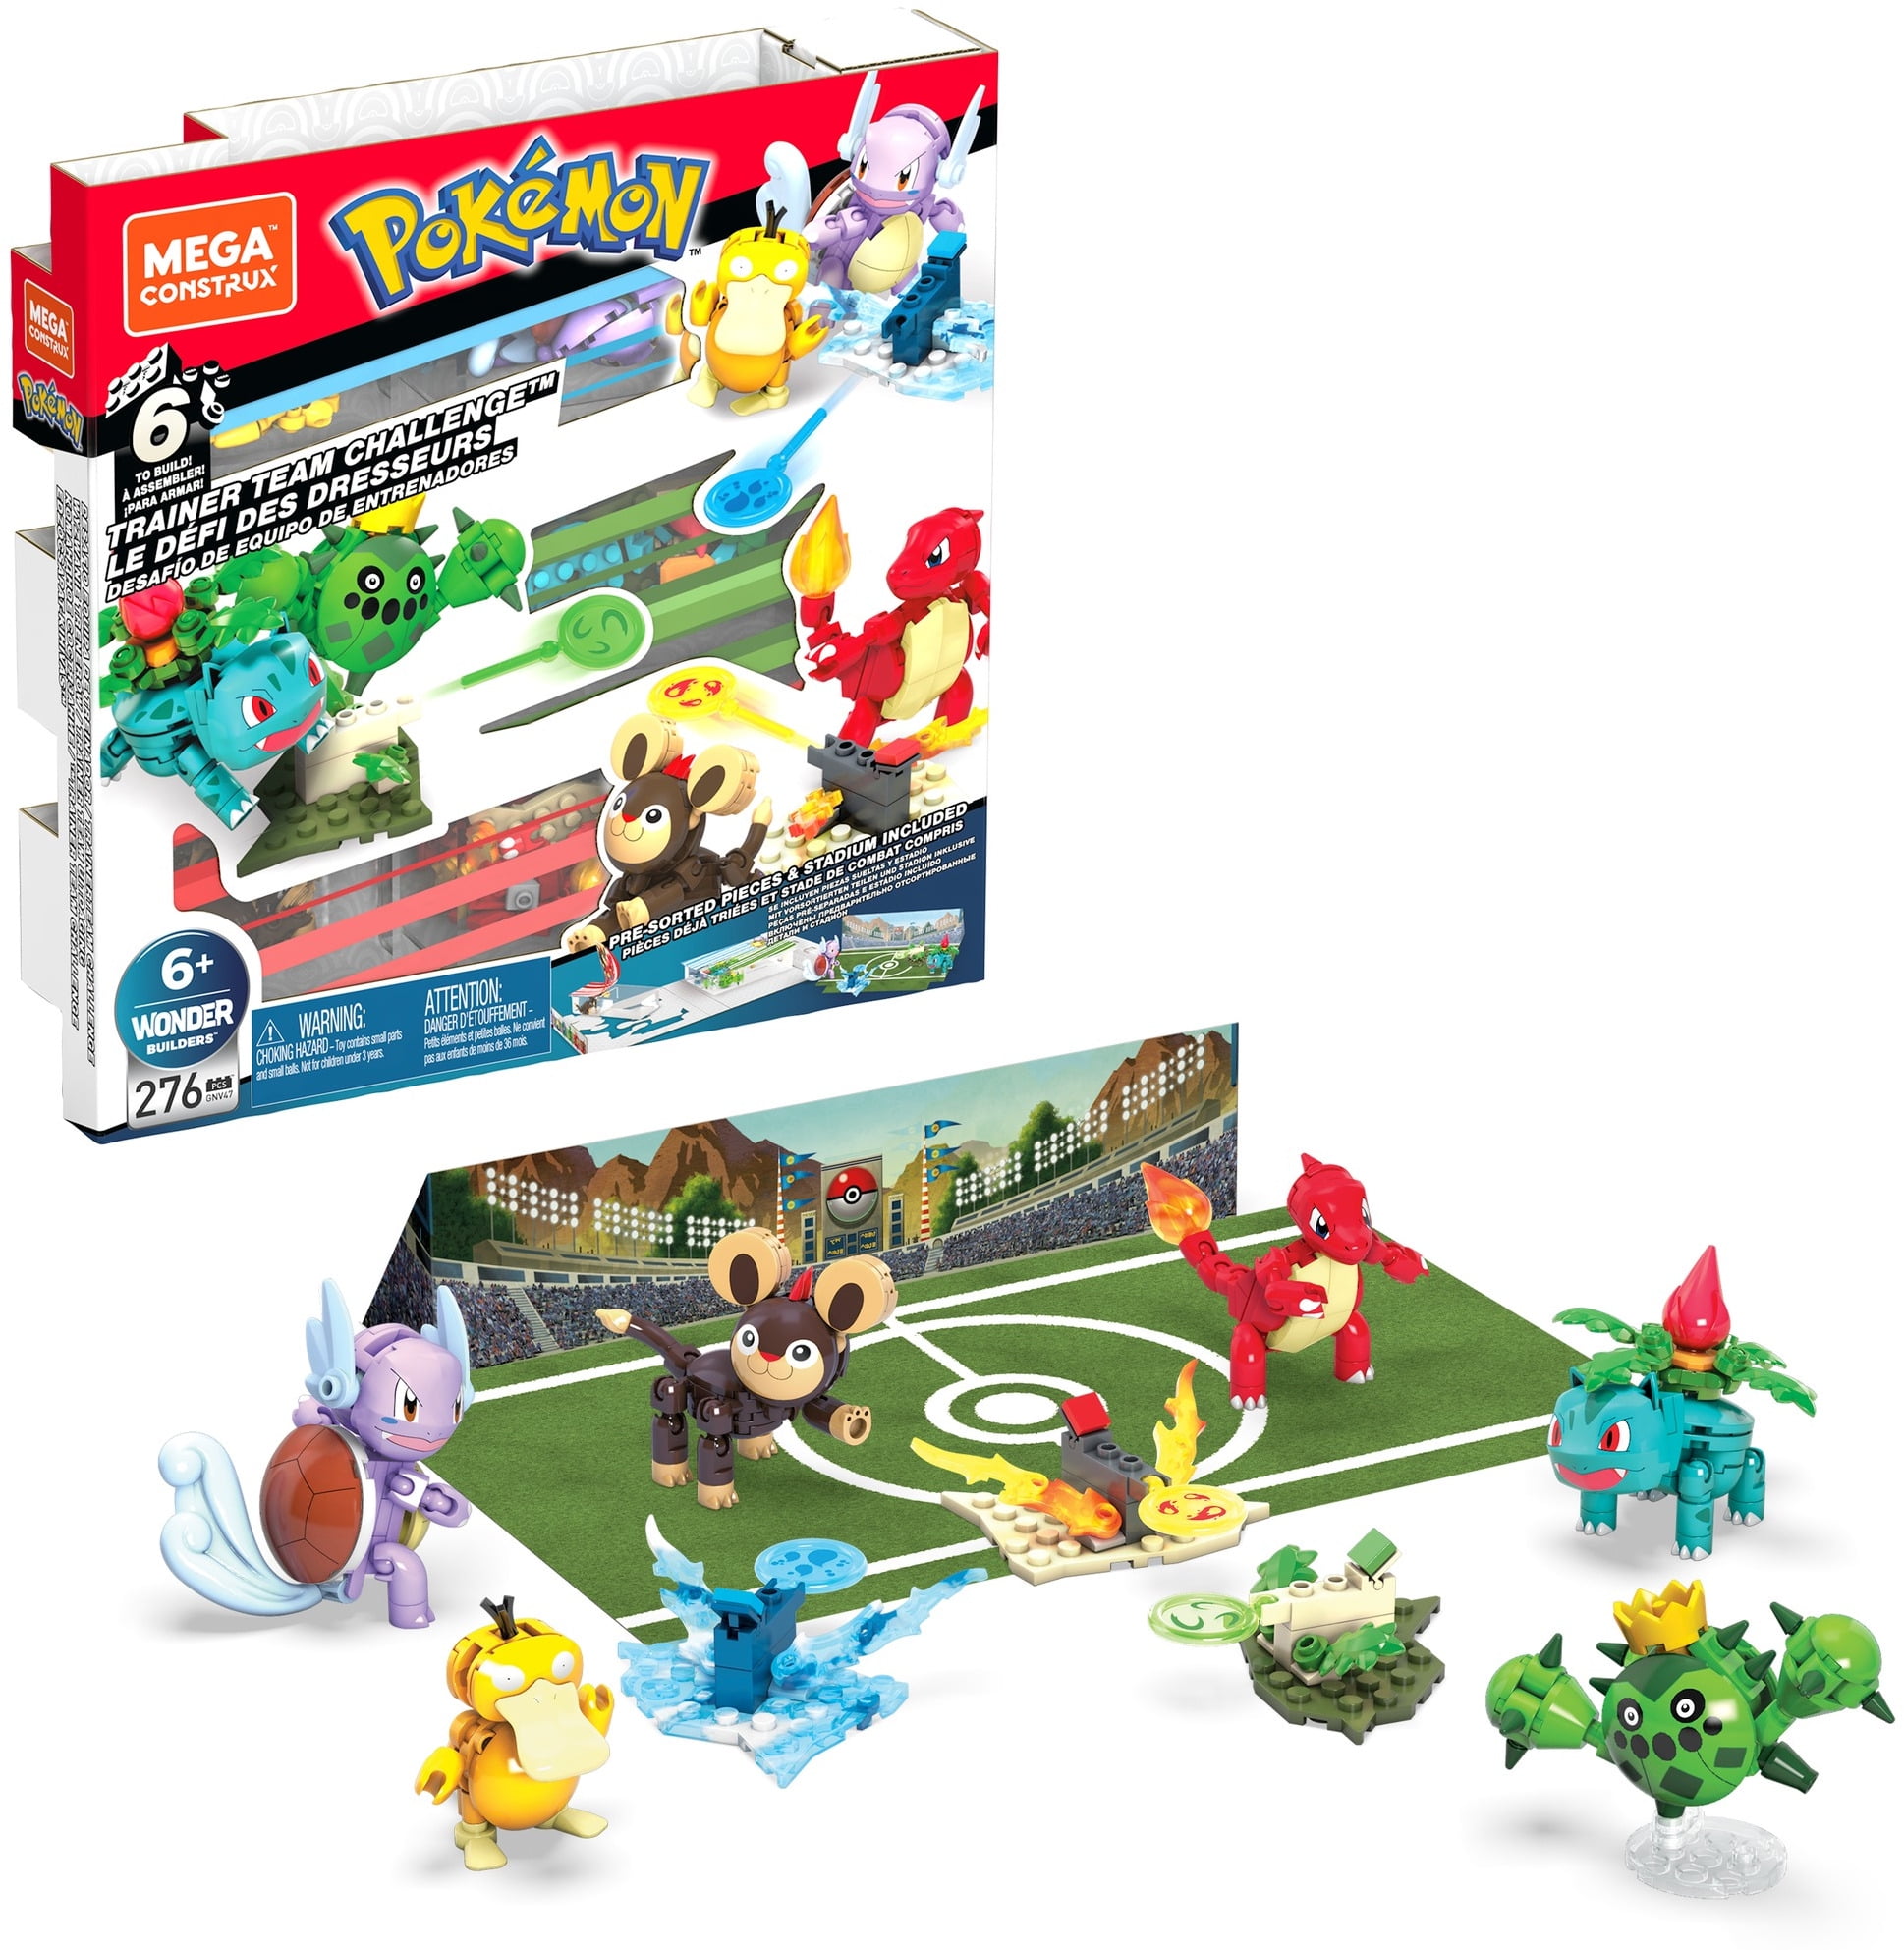 Mega Construx Pokemon Ditto Construction Set with character figures,  Building Toys for Kids (26 Pieces) 